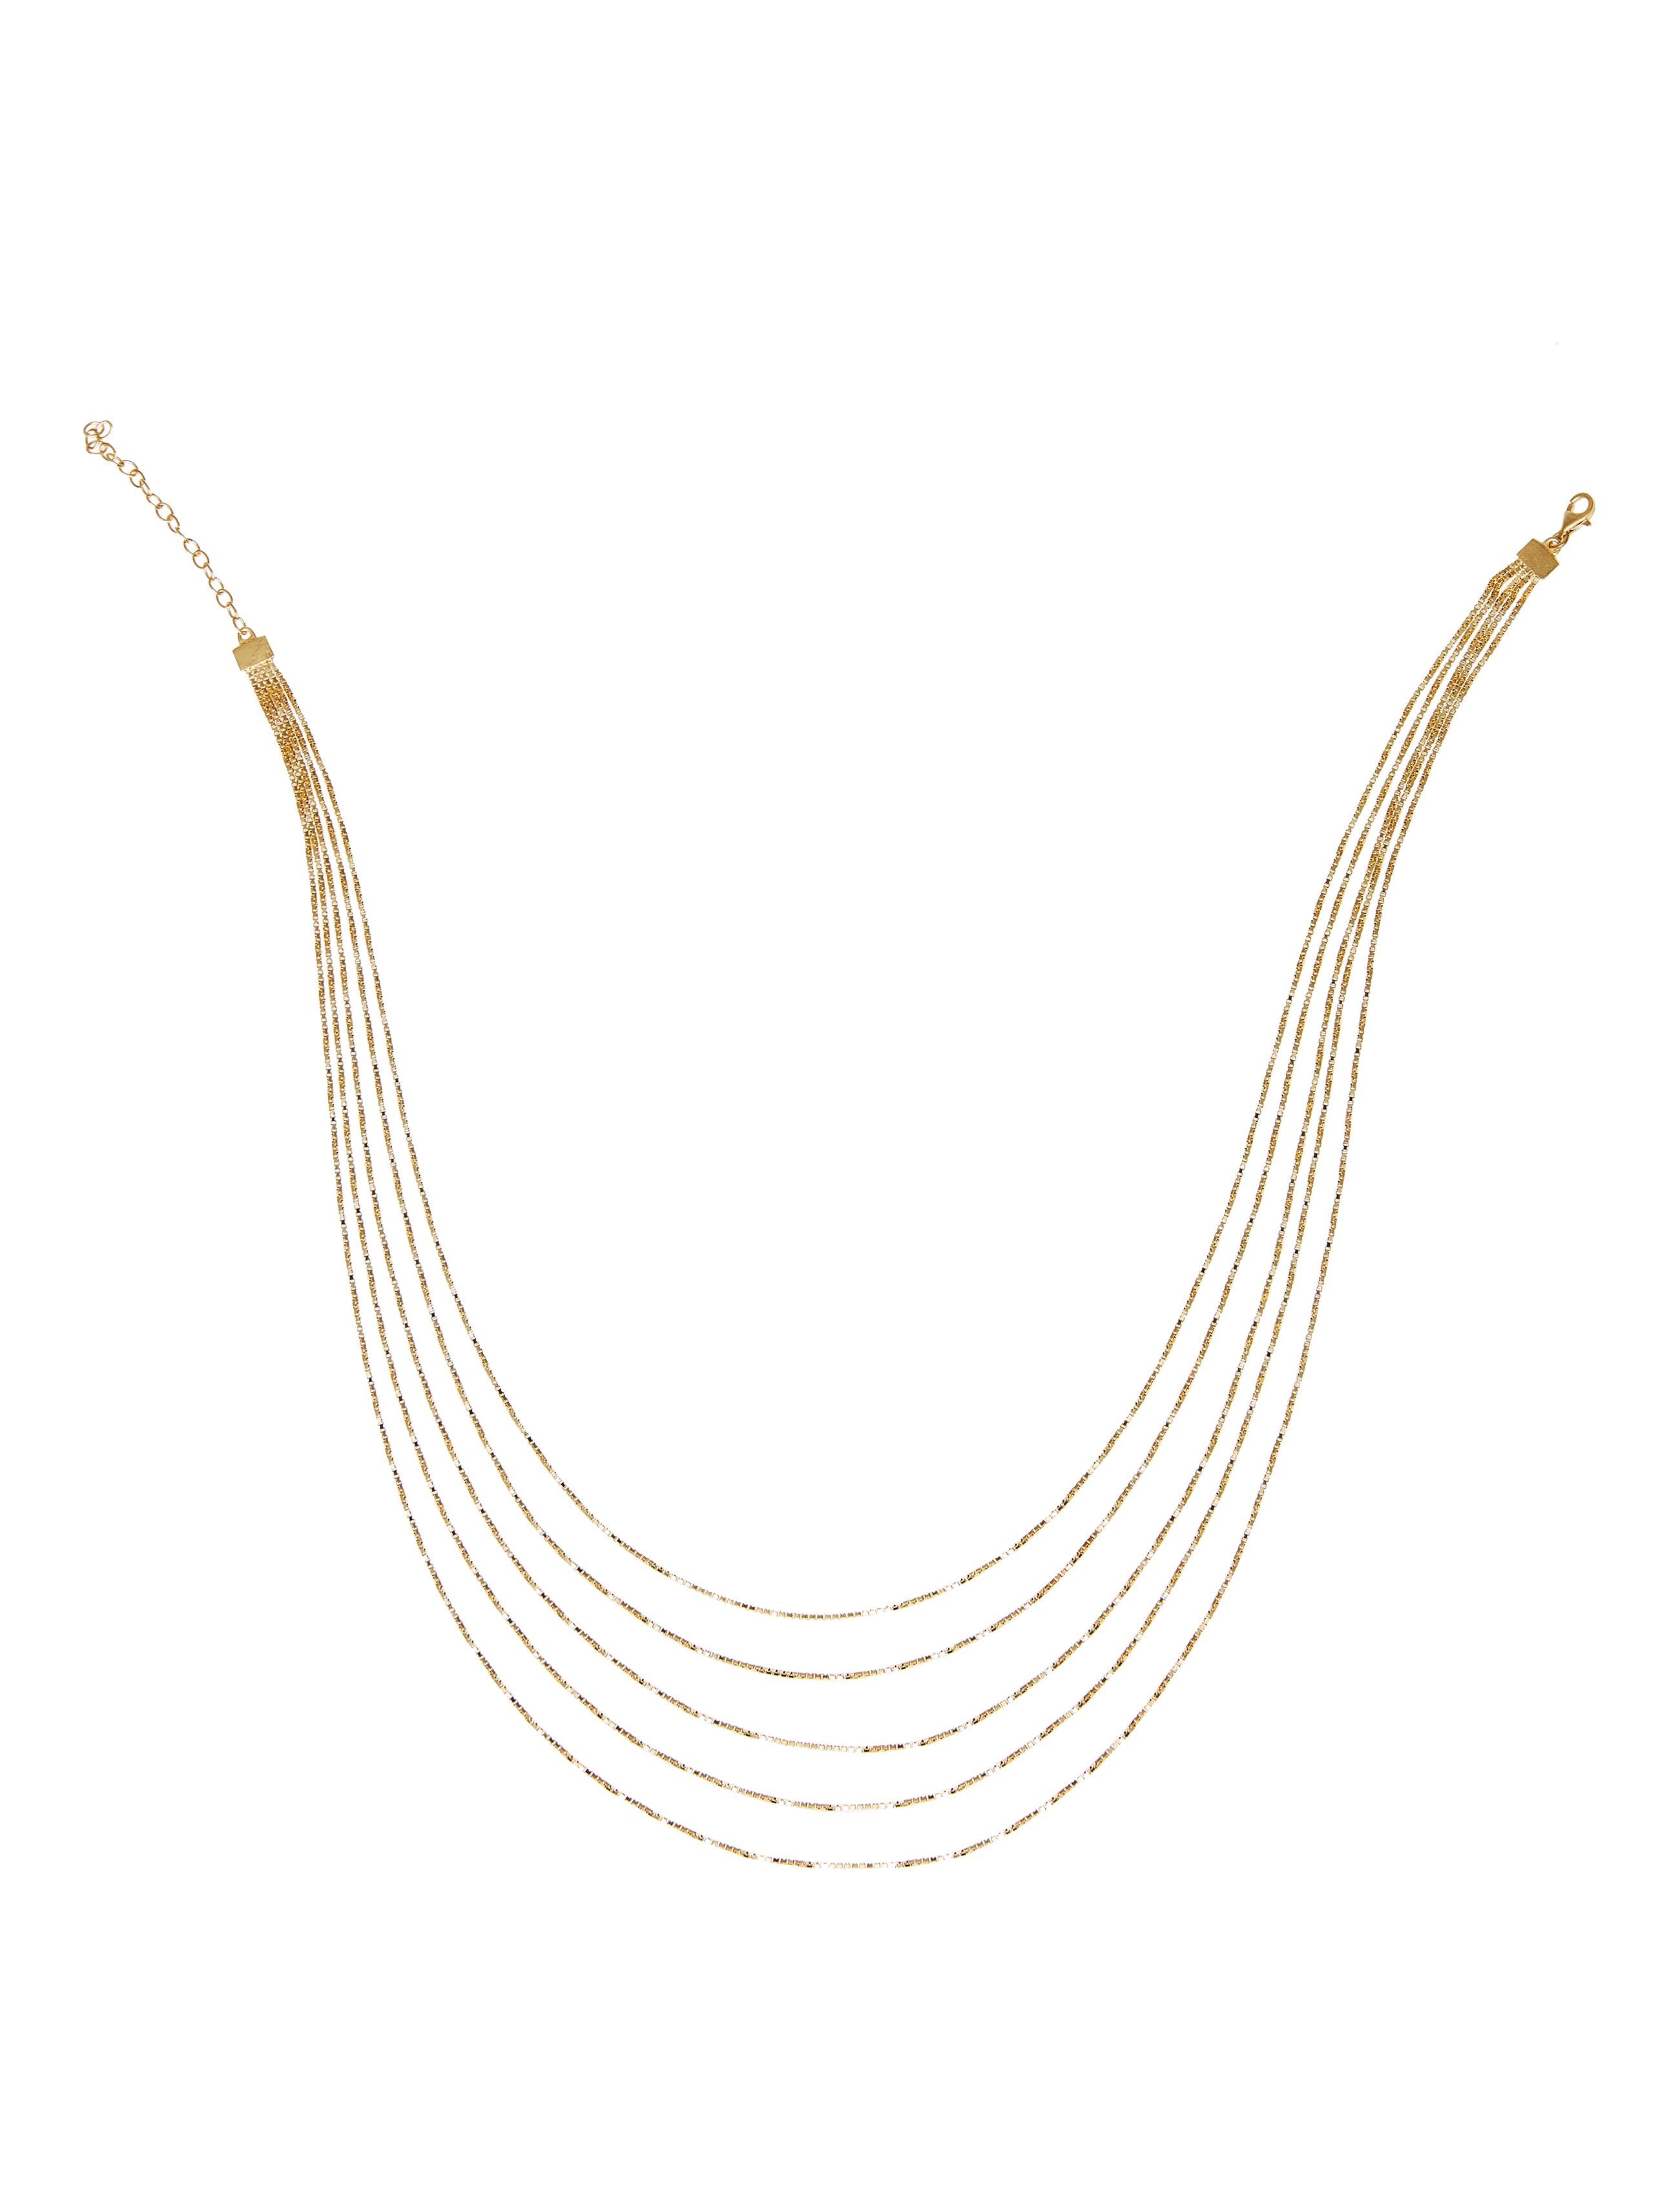 Women's Necklace Minimal Long Box Chain Shiny 18 Karat Gold-Plated Silver Greek For Sale